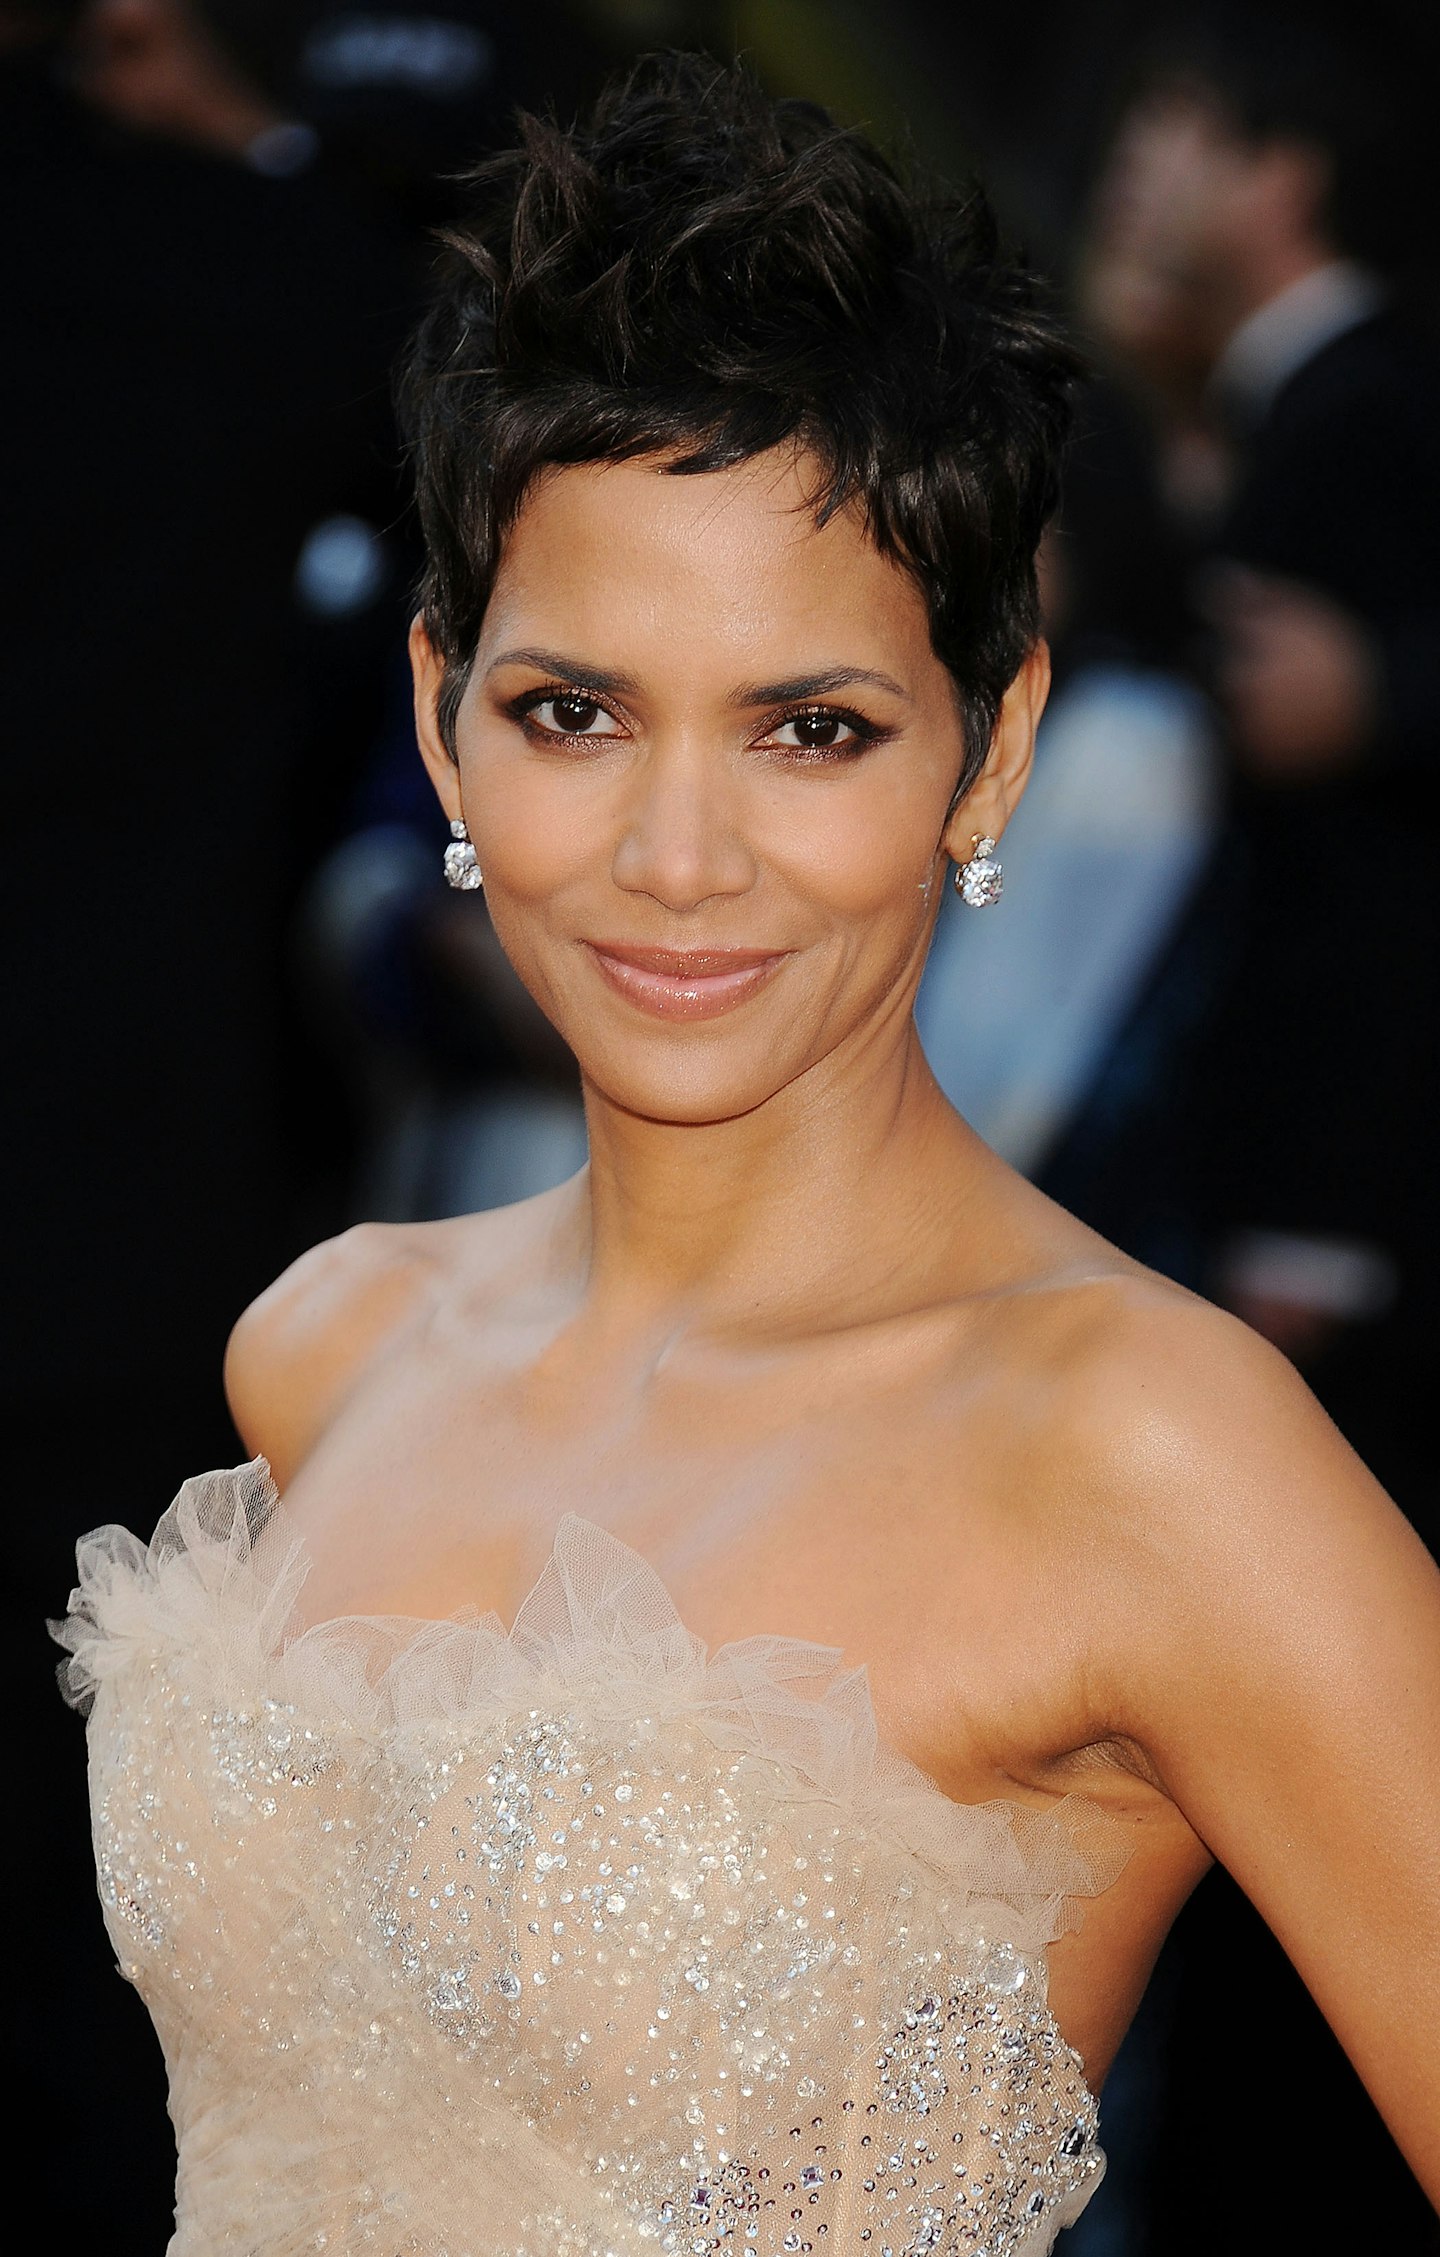 10 Chic Pixie Cuts For Summer That Will Convince You To Make The Chop